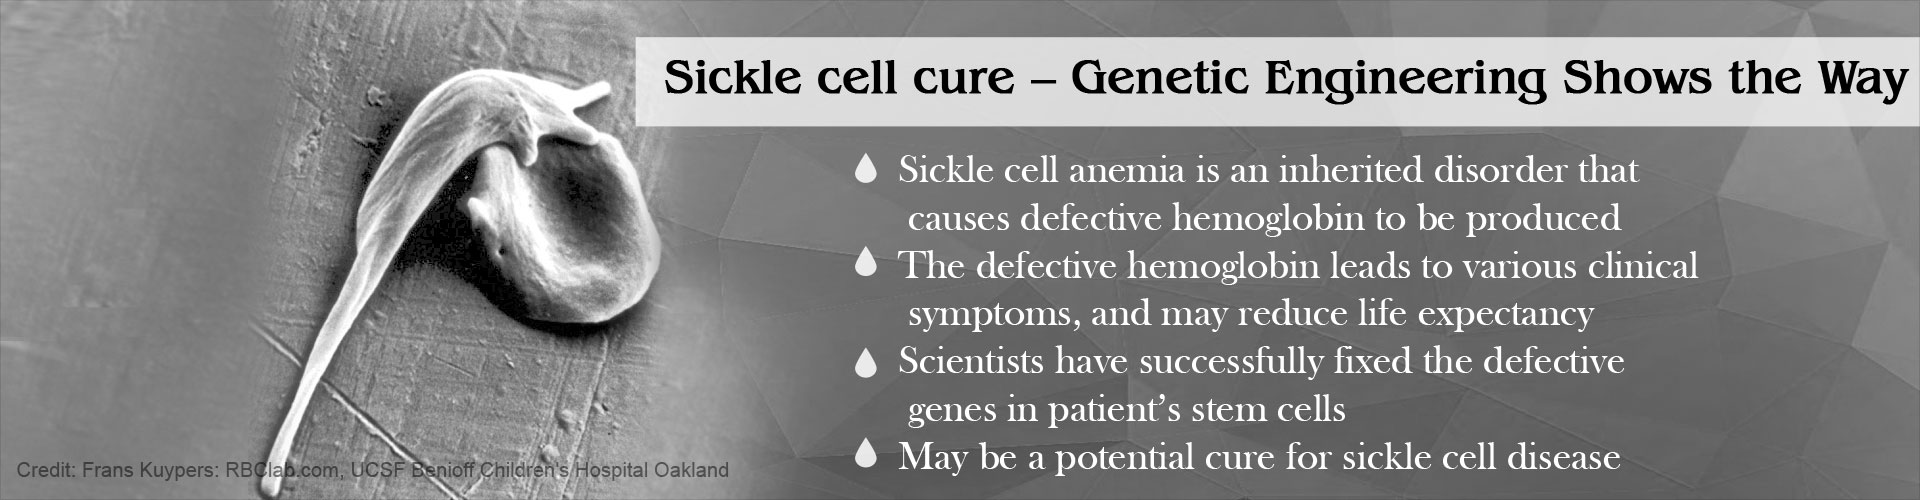 Sickle Cell Cure – Genetic Engineering Shows The Way